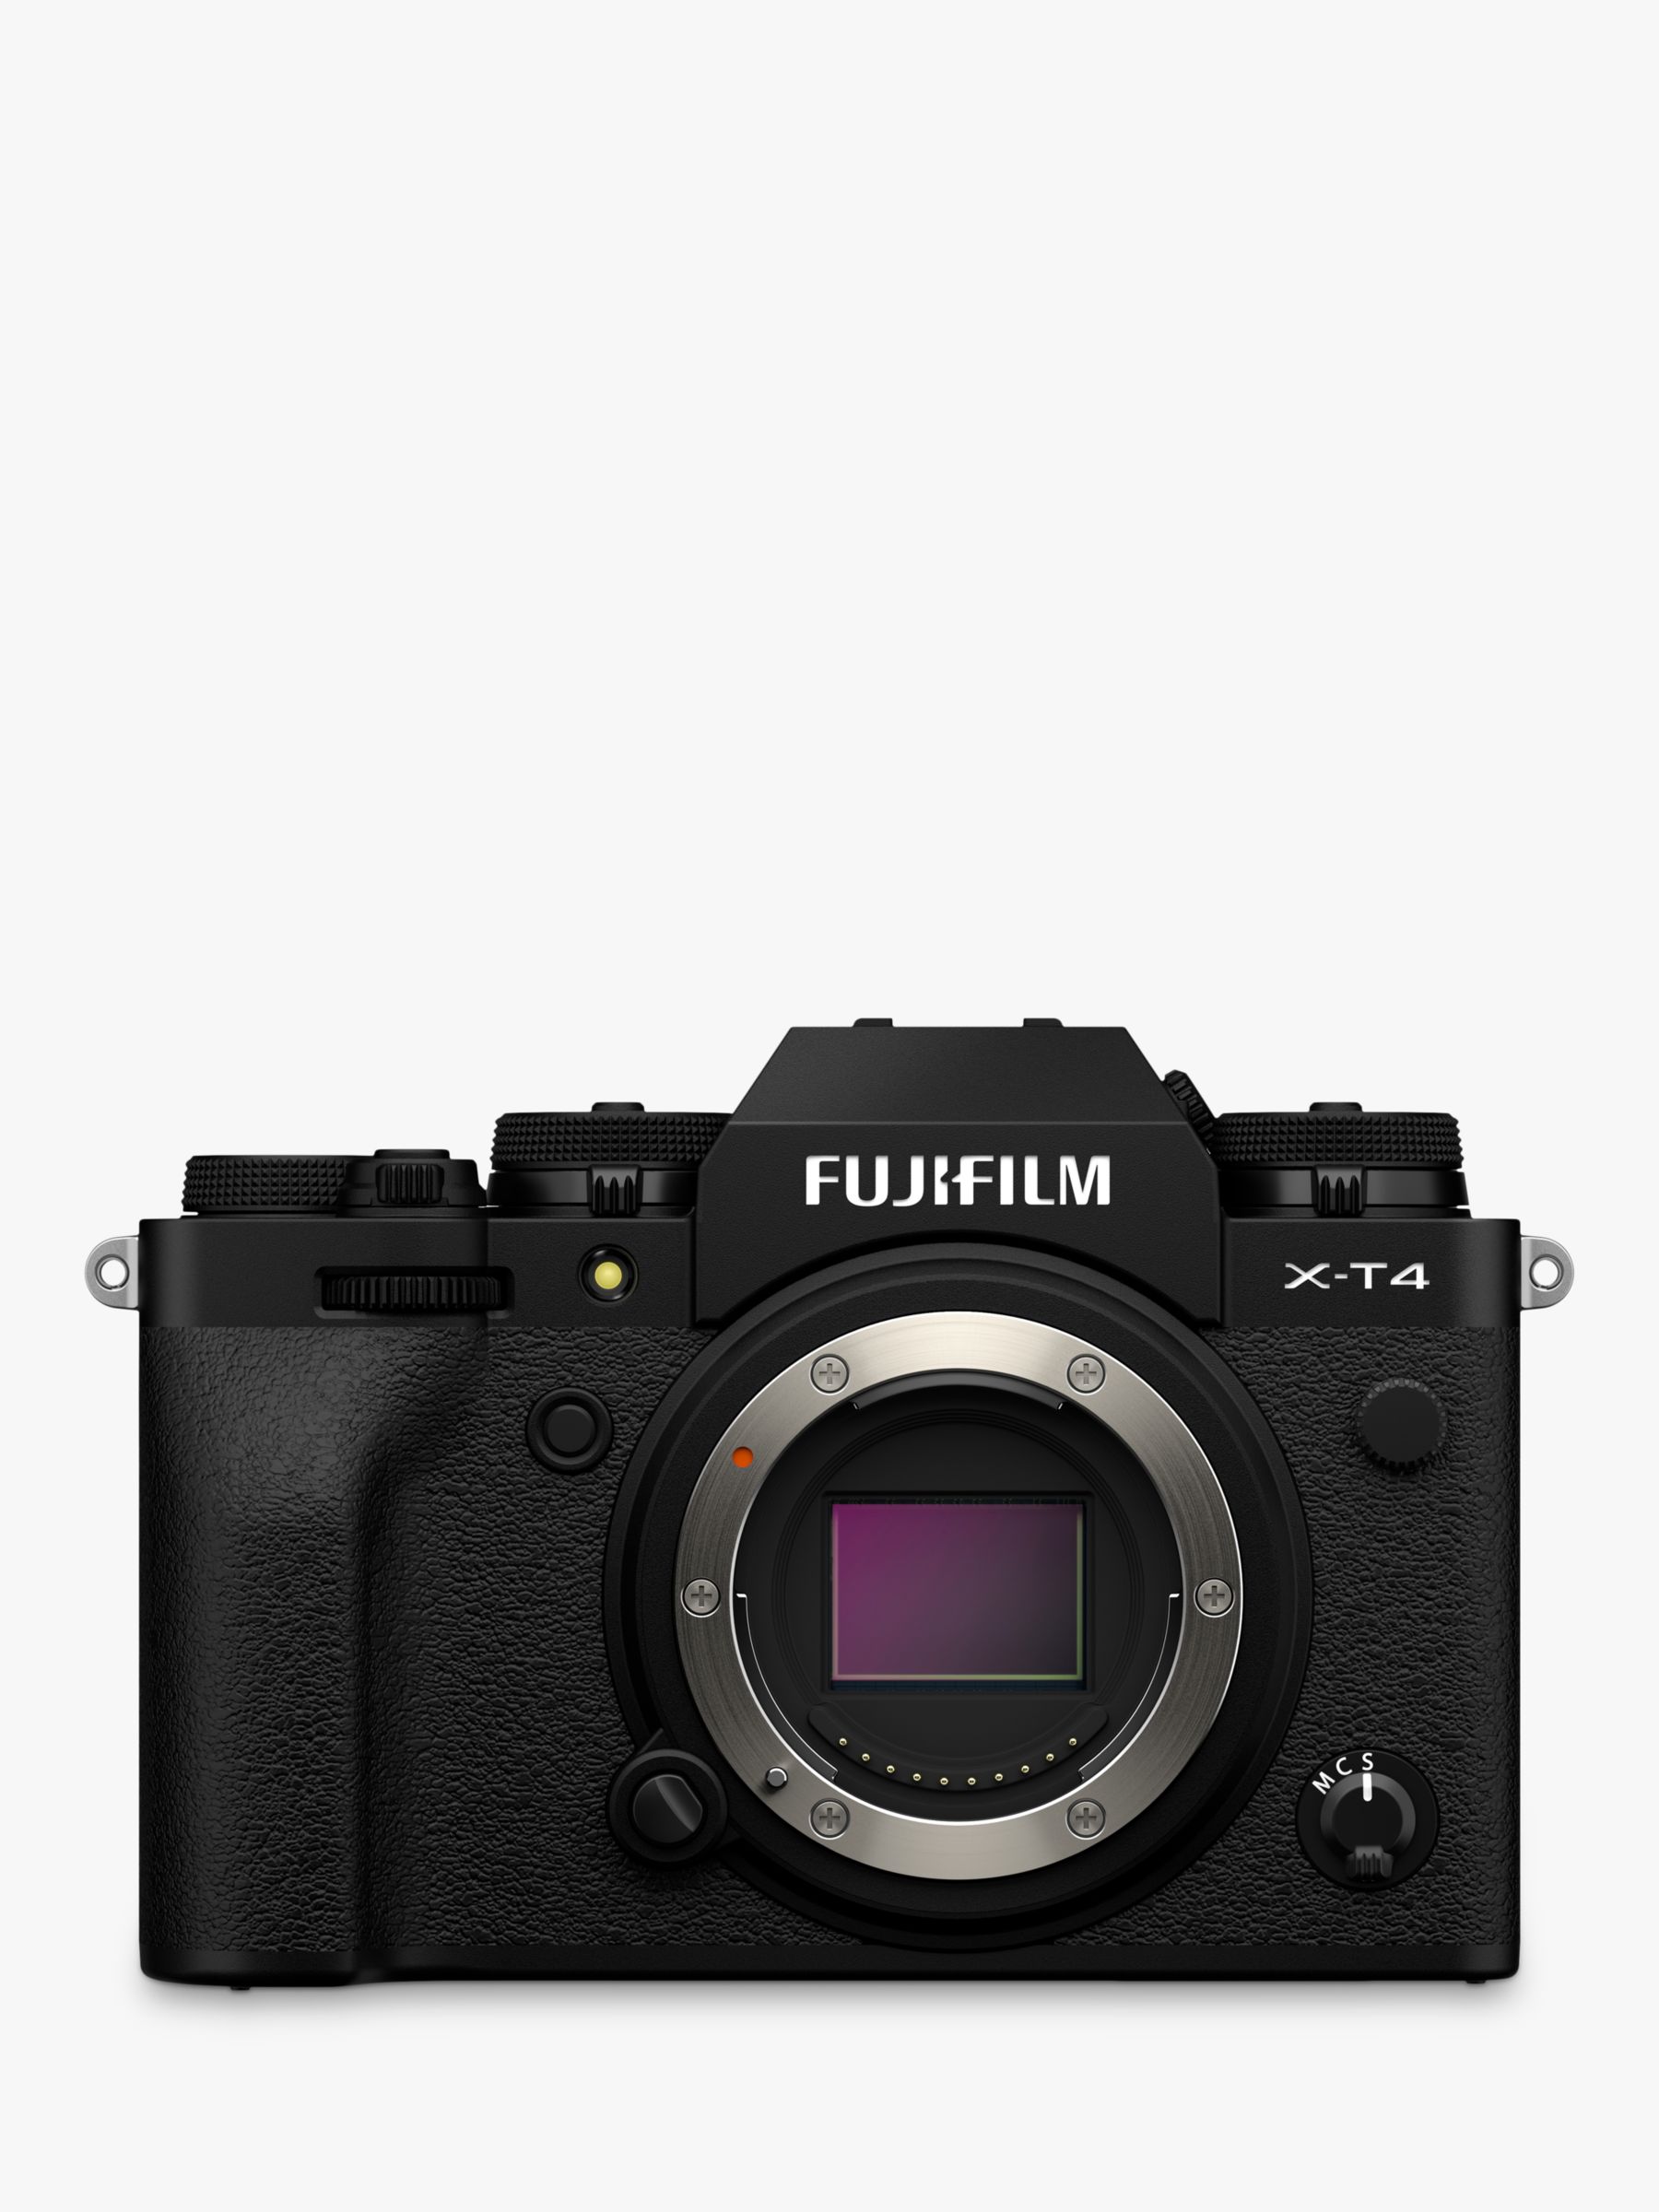 Image of Fujifilm XT4 Compact System Camera 4K Ultra HD 261MP WiFi Bluetooth OLED EVF 3 LCD Touch Screen Body Only